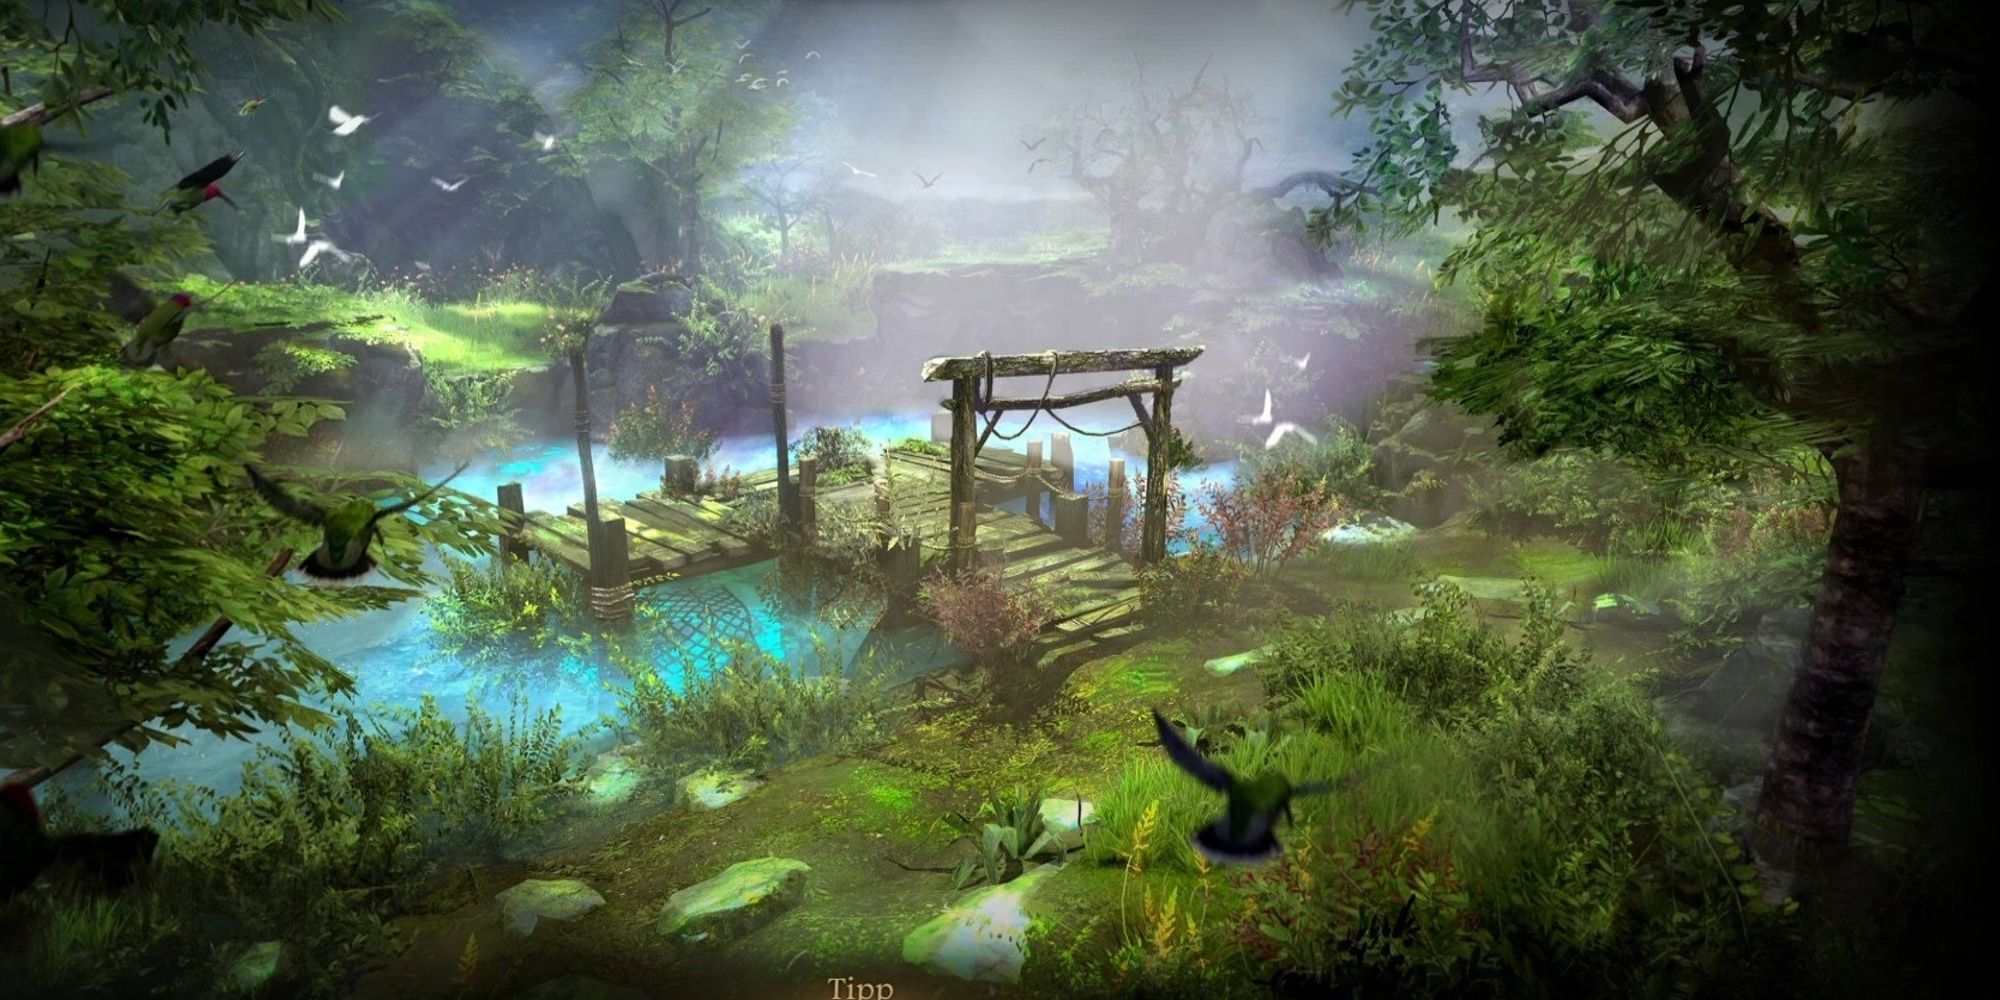 The character in Lost Ark is loading into the Erasmo's Island showcasing a small dock with vibrant vegetation and wildlife.